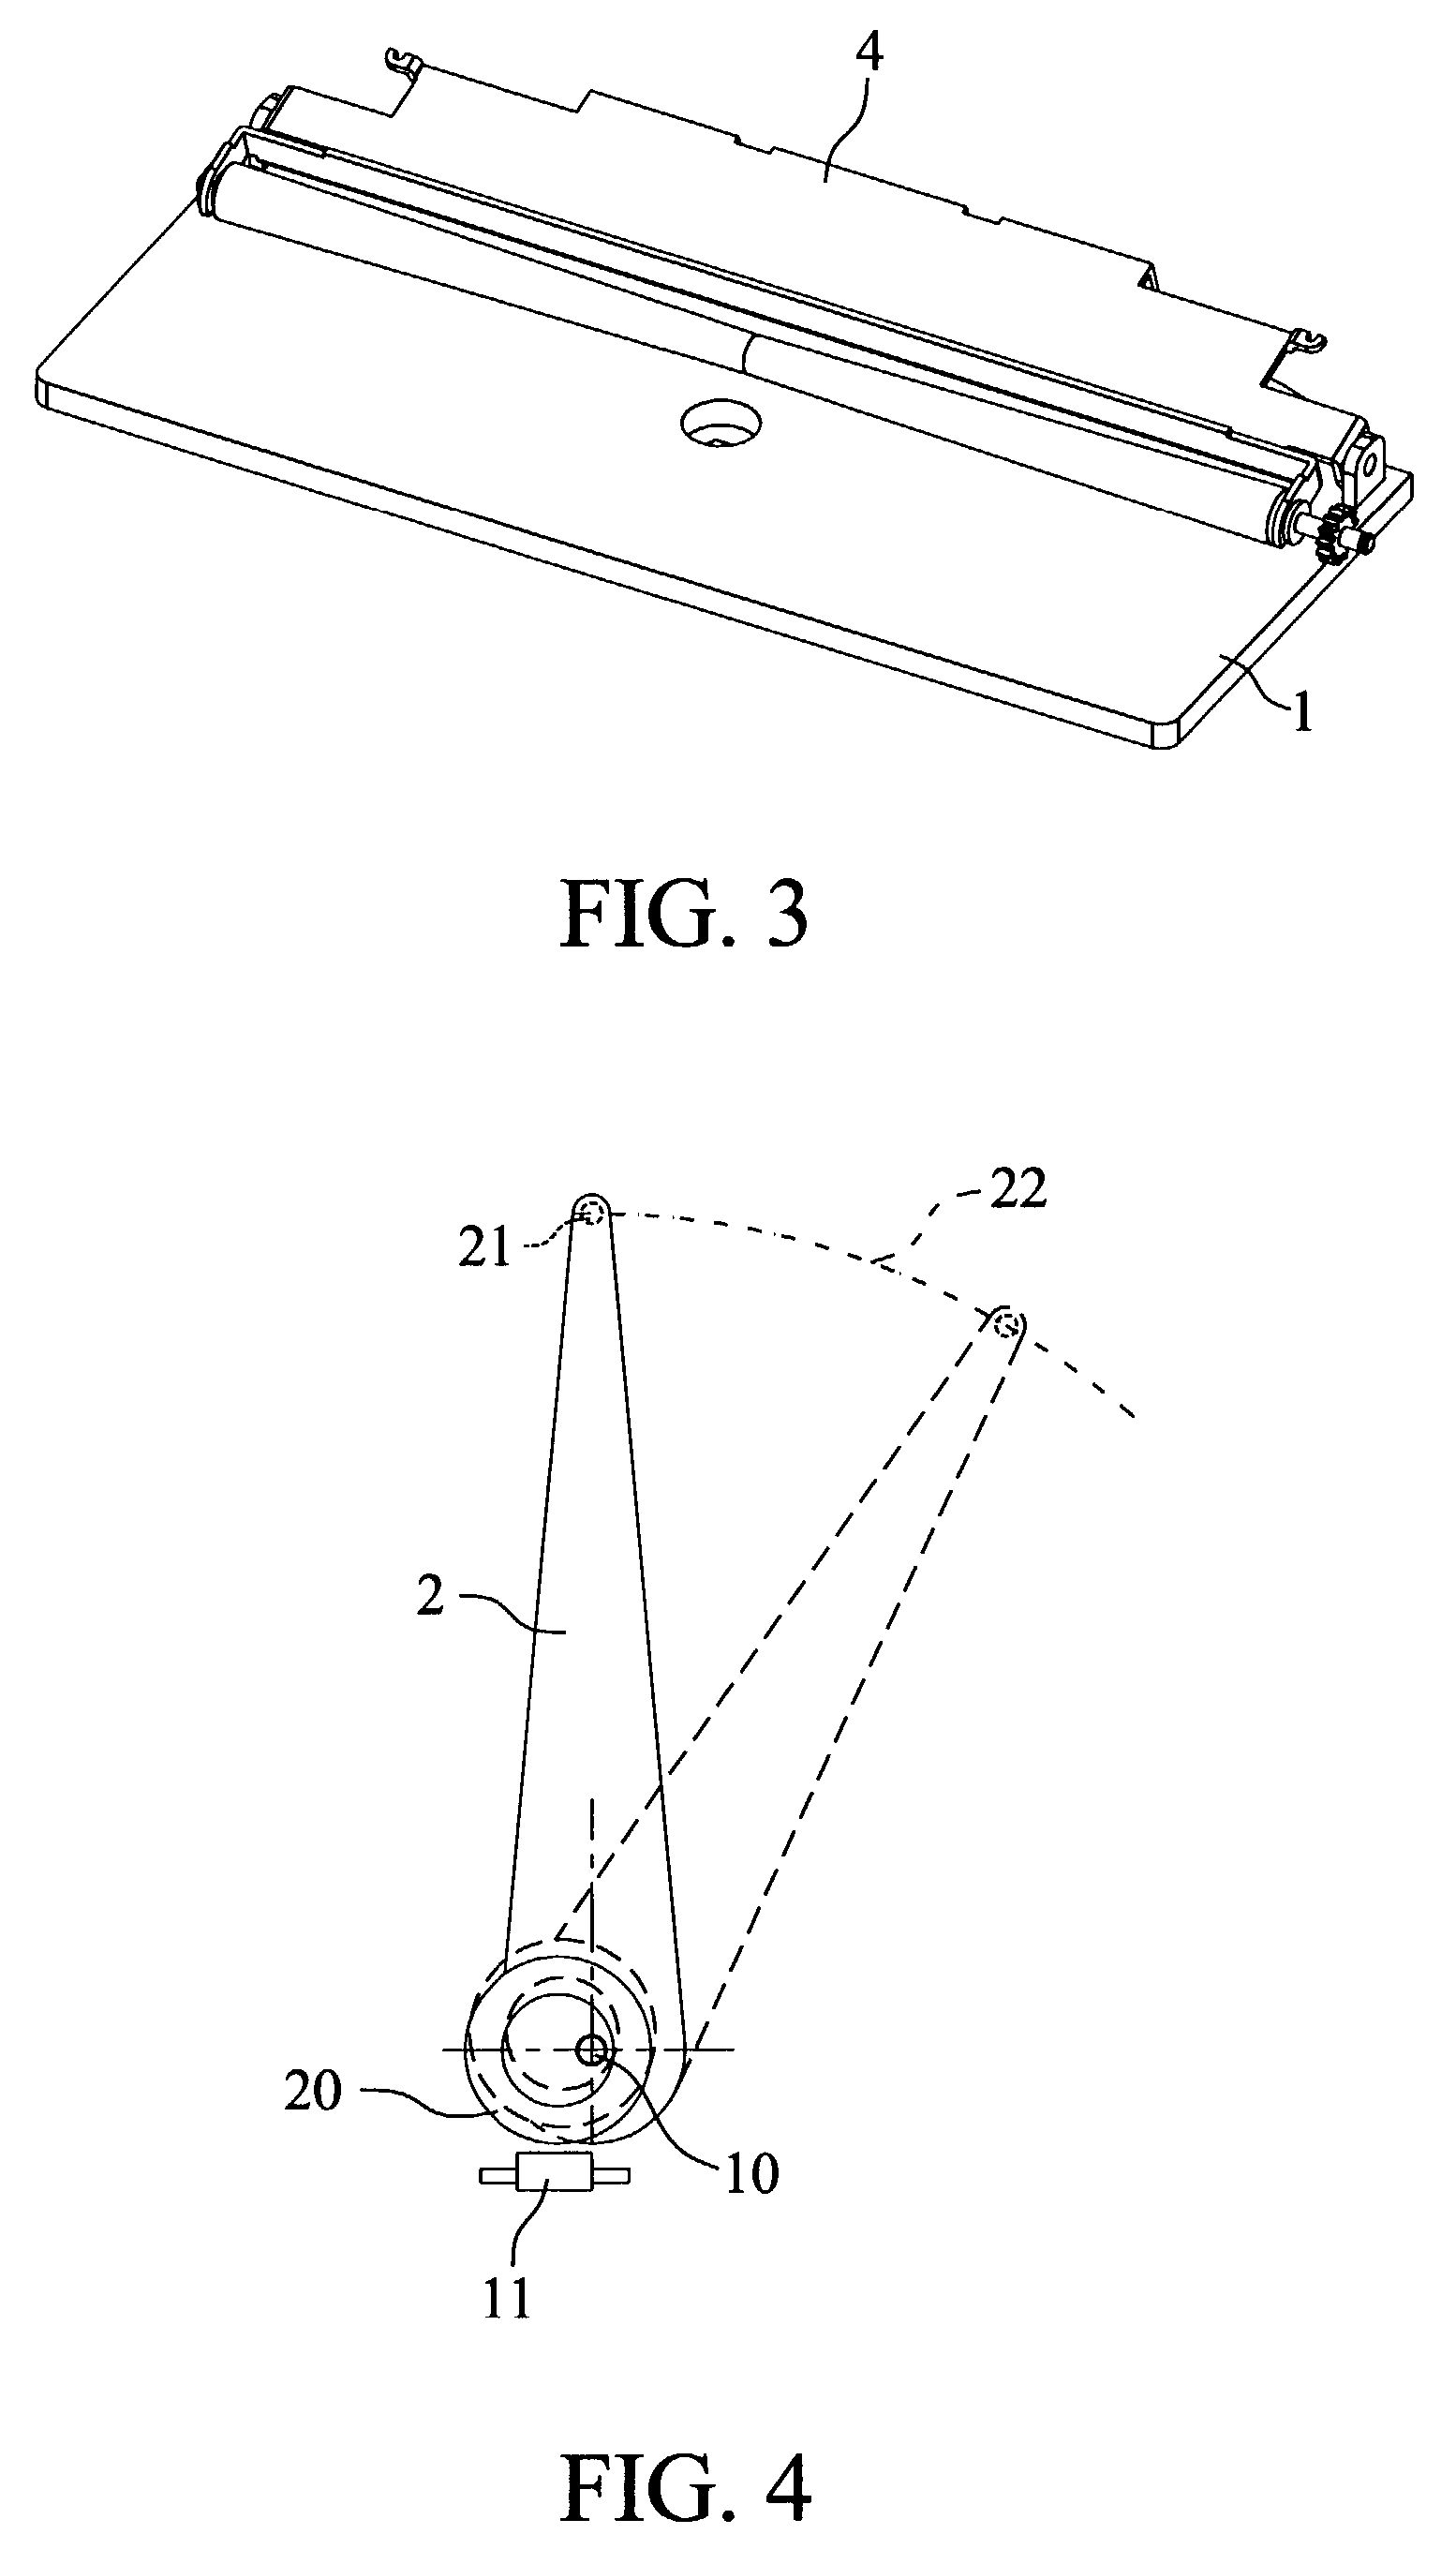 Optical disc loading using two detecting arms and an edge sensor